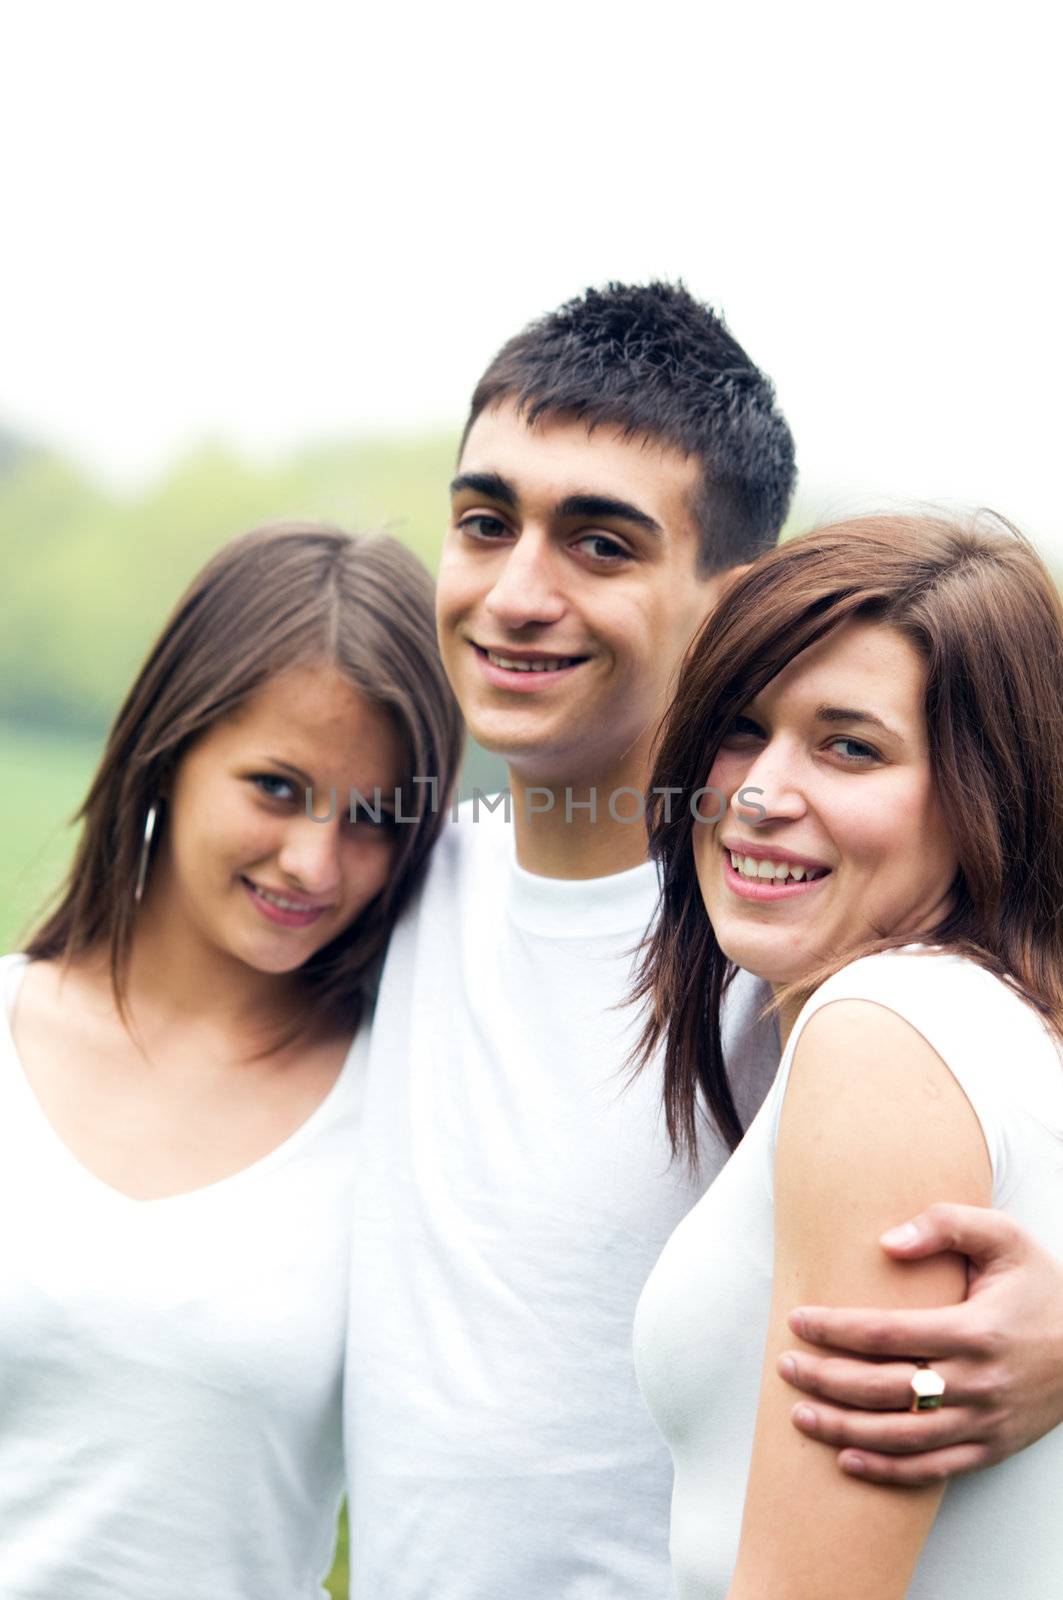 Three young happy friends standing together and smiling